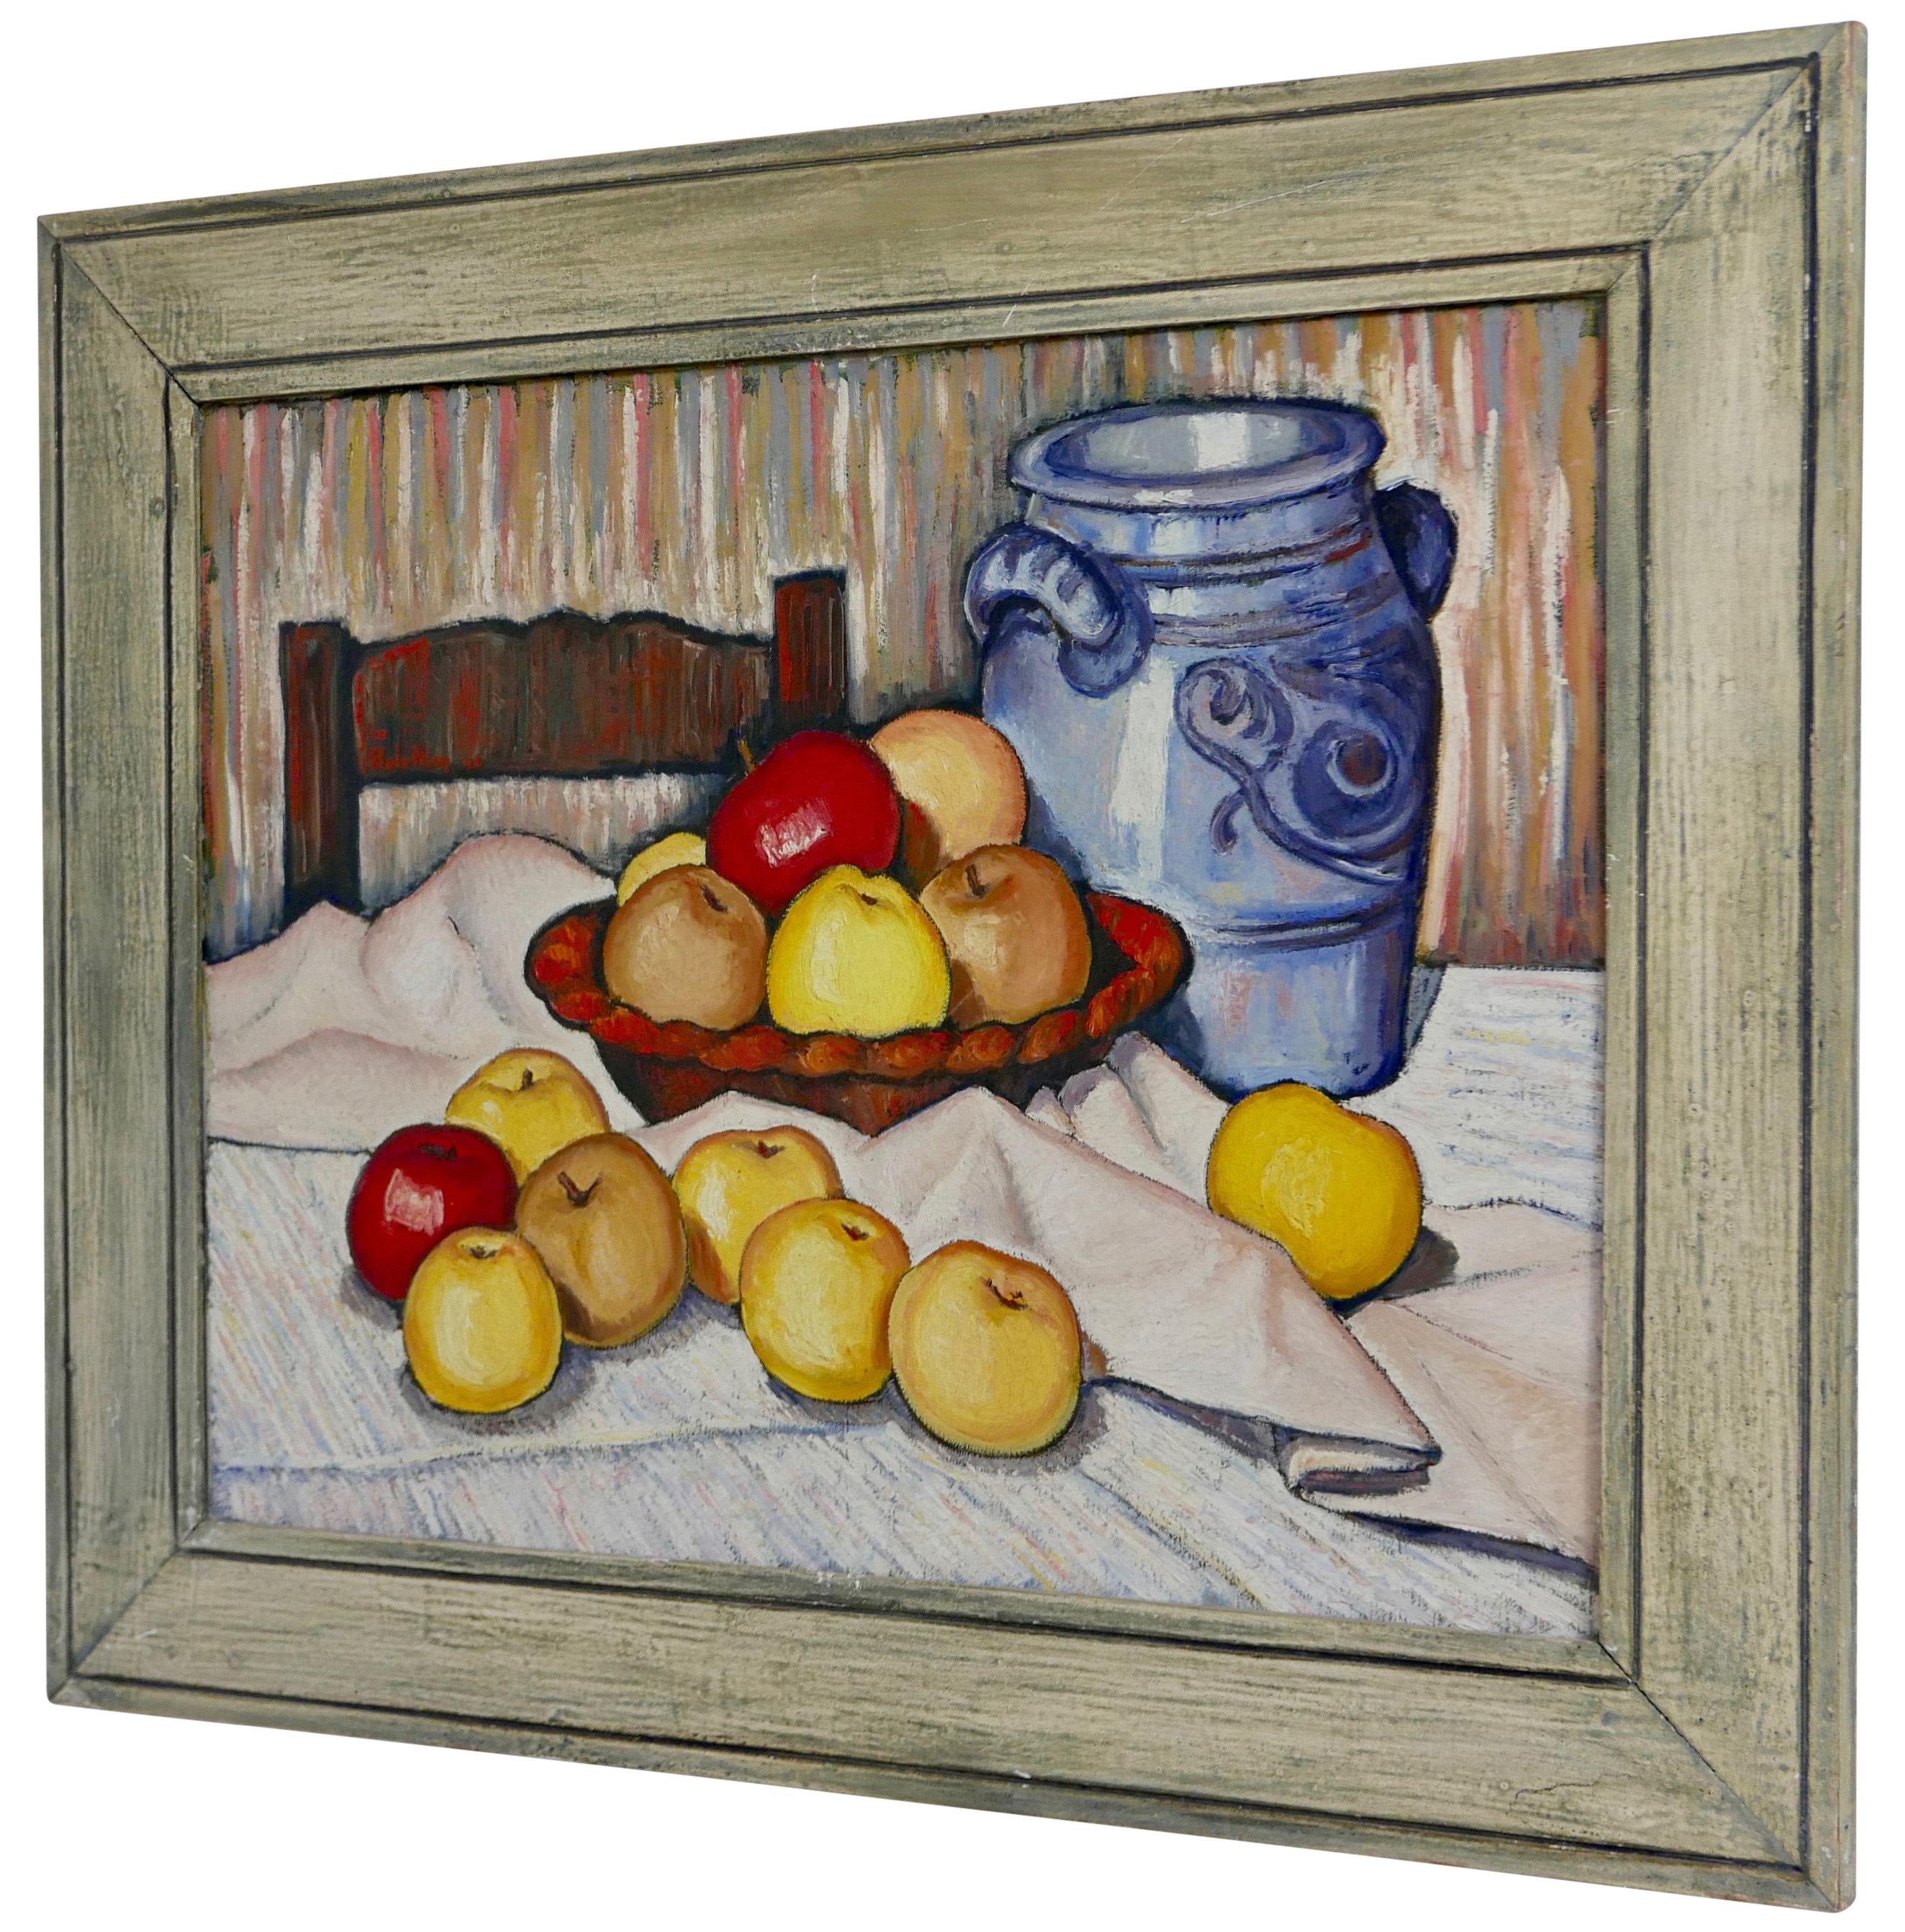 Pair of Mid-20th Century Still Life Paintings of Fruit Signed Bolomey, 1948 For Sale 5